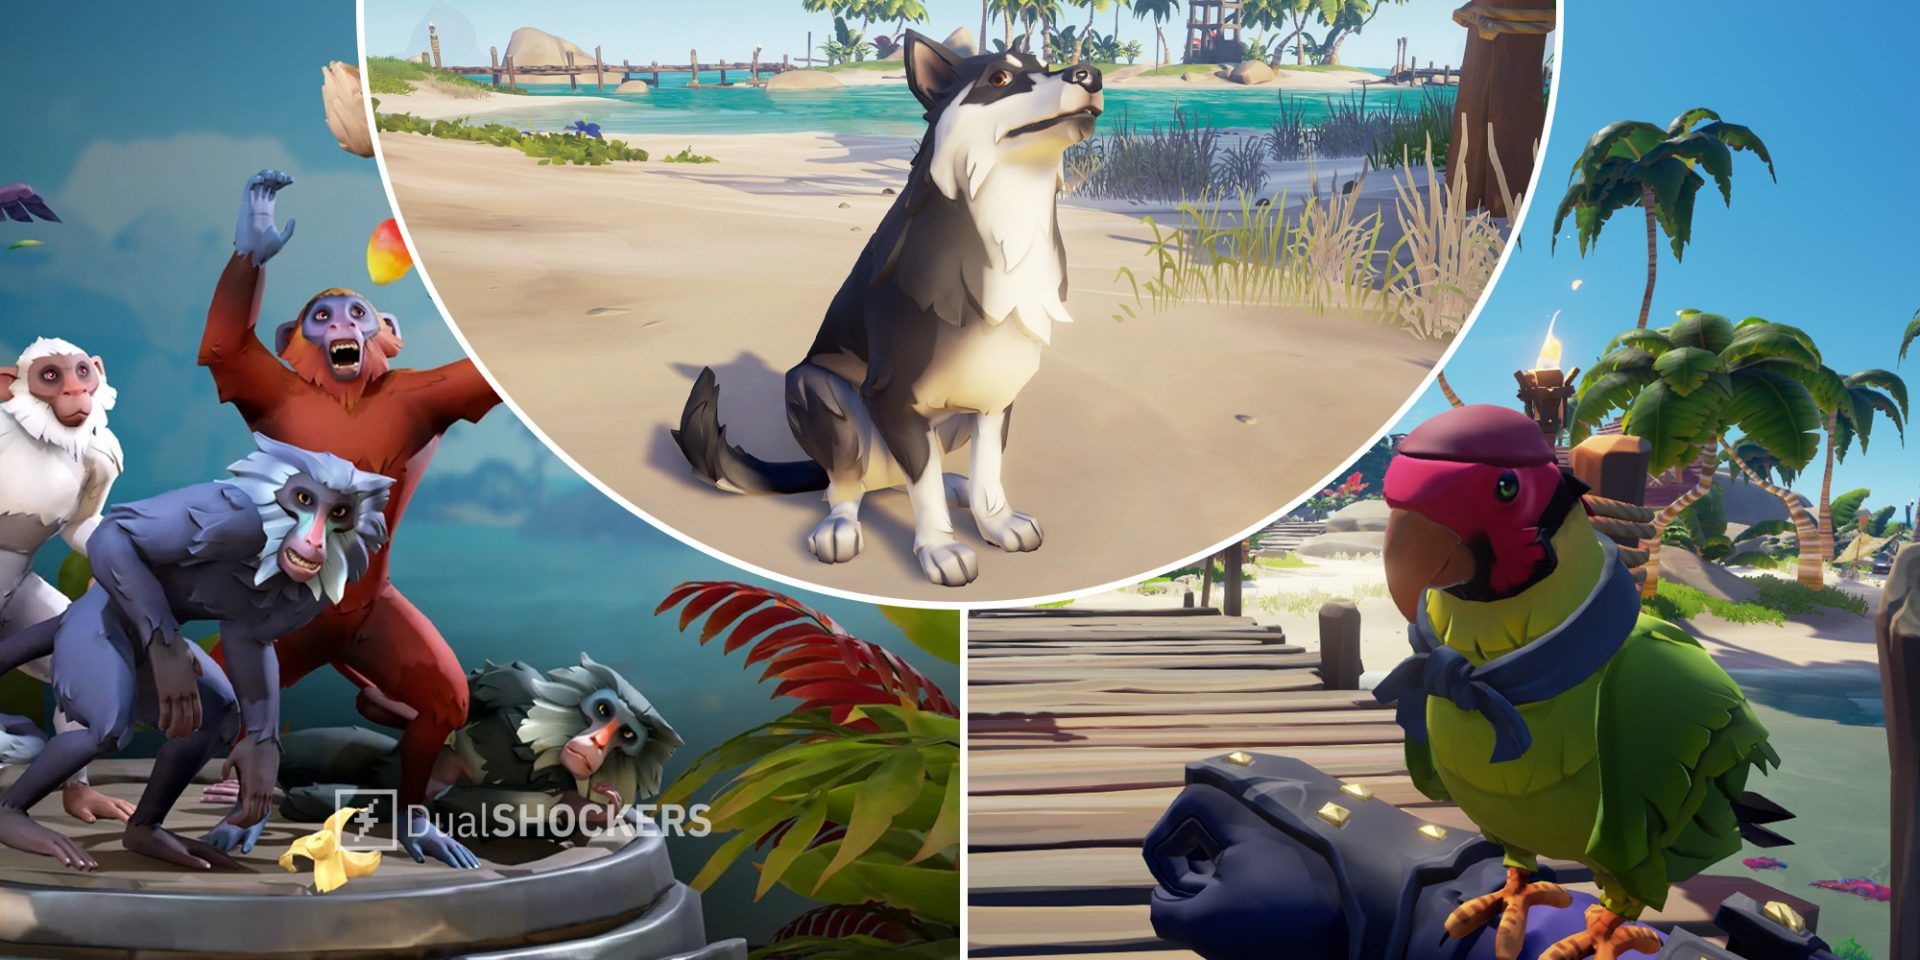 Sea of Thieves monkeys on left, dog in middle, parrot on right